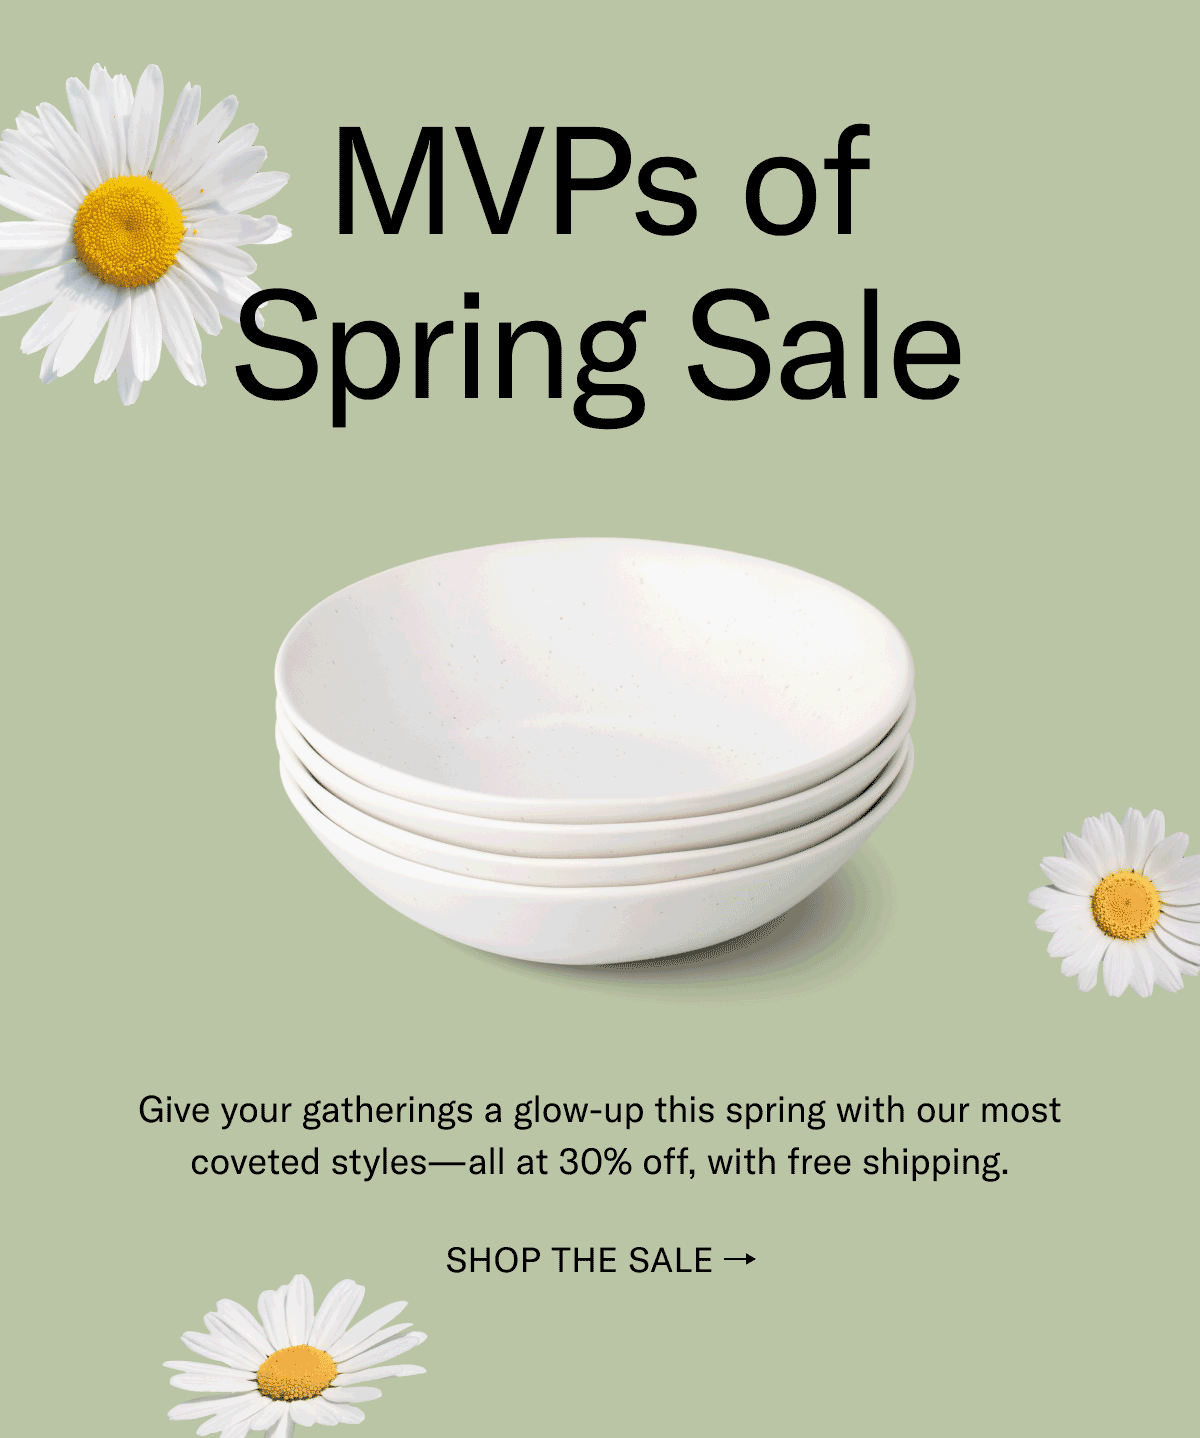 MVPs of the Spring Sale